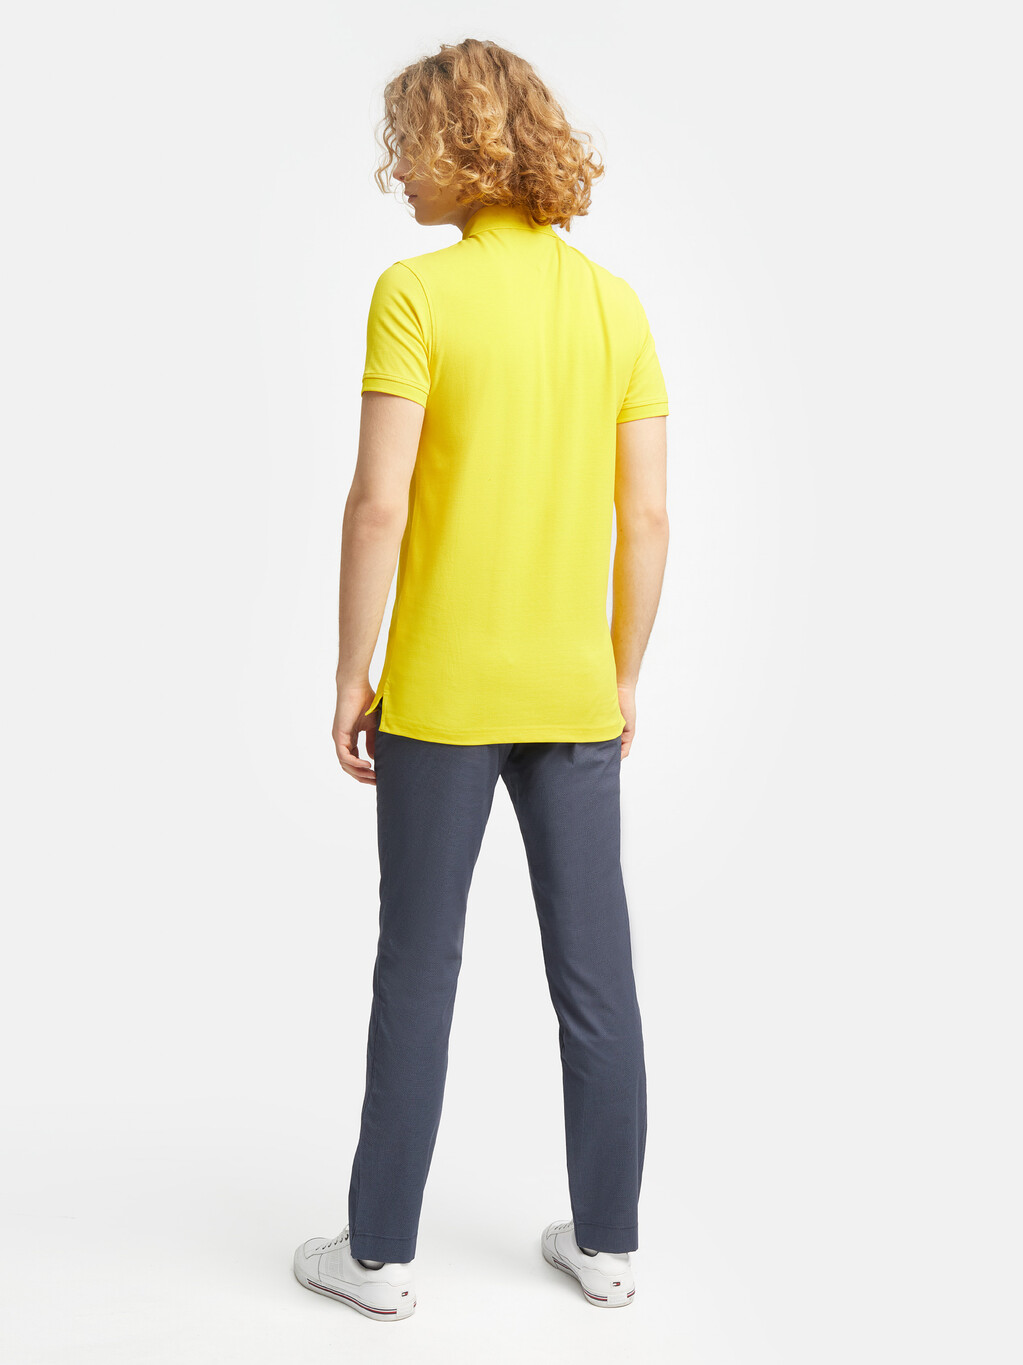 1985 Collection Slim Fit Polo, Vivid Yellow, hi-res